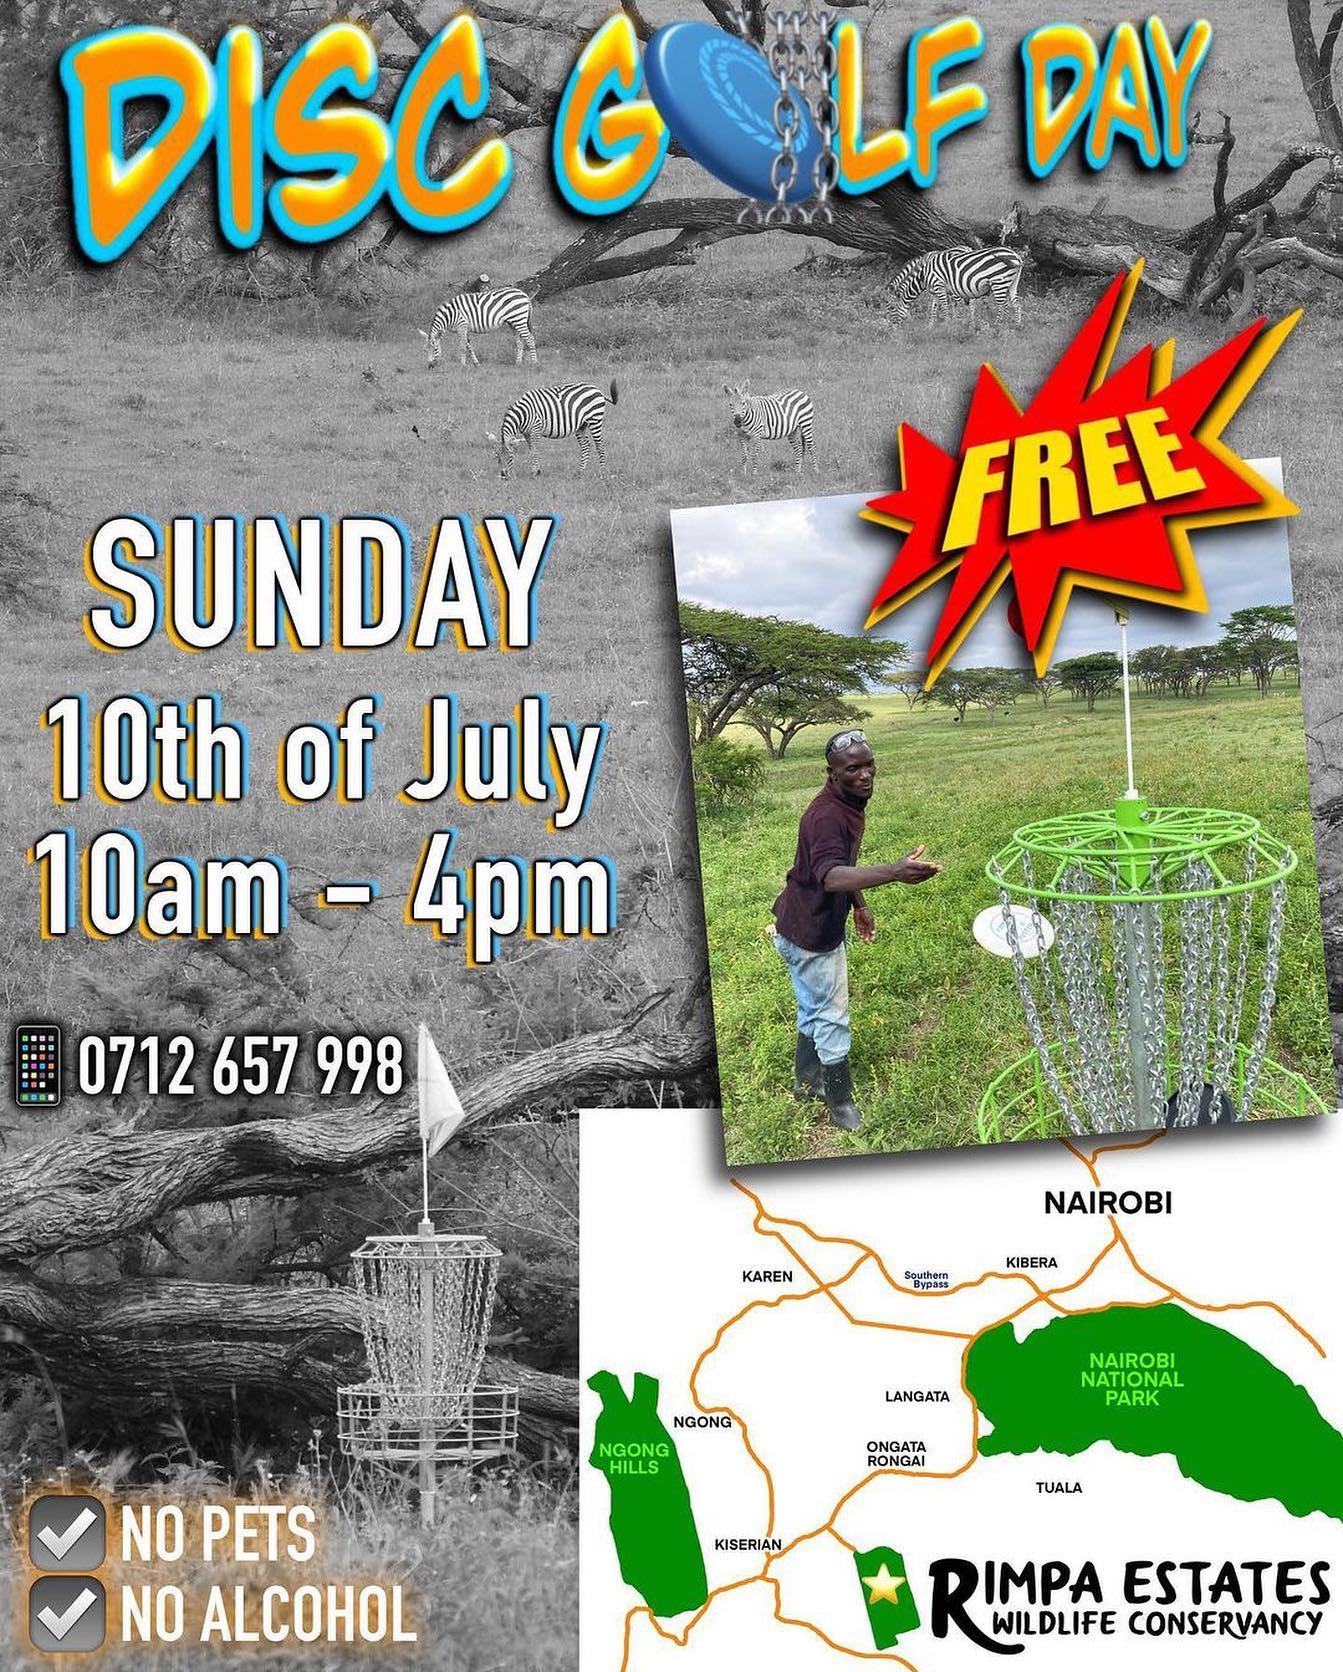 FREE Disc Golf Day 🥏⛓💥

Learn to play disc golf and play a few rounds on our 9 hole course. Just 30-45 minutes outside of Nairobi & Karen, located inside a wildlife conservancy.

☑️Sunday, 10 July, 10am-4pm
☑️Bring food and have a picnic
☑️Great for kids and adults 
☑️No pets or alcohol 
☑️0712 657 998 WhatsApp 

#discgolf #discgolfkenya #kenya #nairobi #magicalkenya #kenyawildlife #playdiscgolf #nairobifamily #nairobikenya #karenkenya